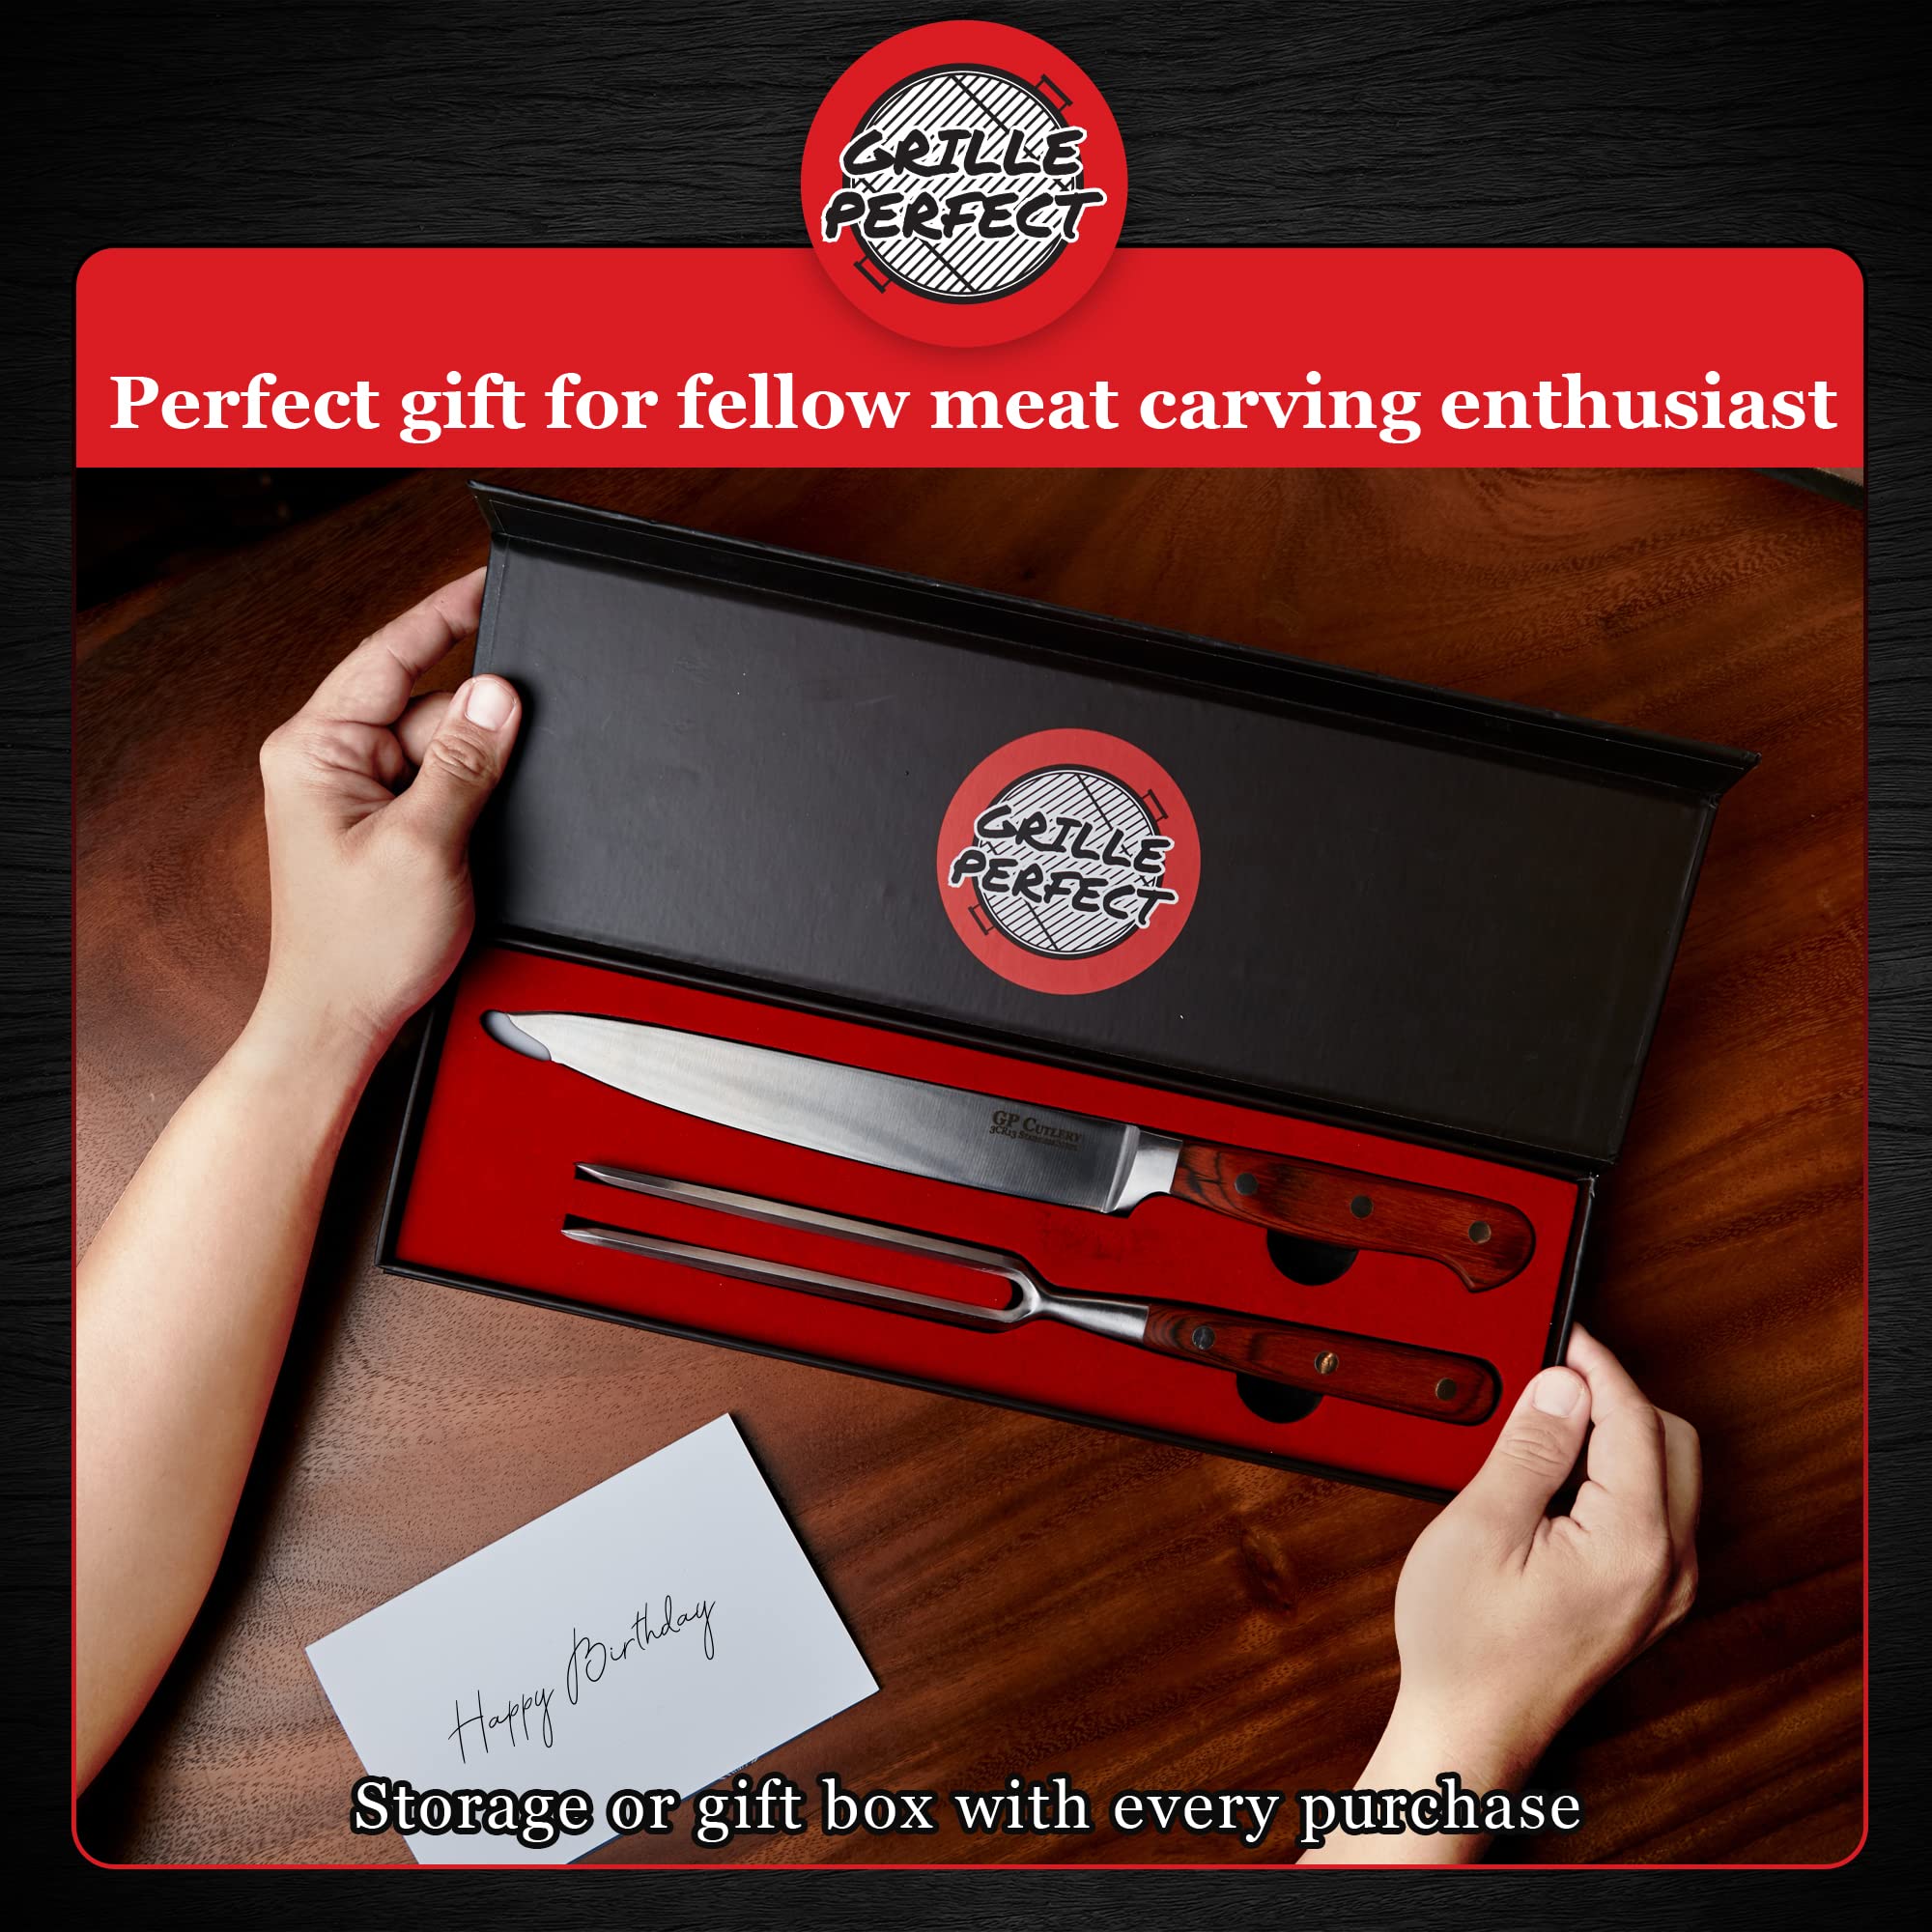 Meat Carving Knife Set with Fork - Meat Carving Knife - Knife Carving for Meat - Carving Fork Set - Turkey Carving Set Kitchen - Carving Knife for Ham - Meat Carving Tools Sets